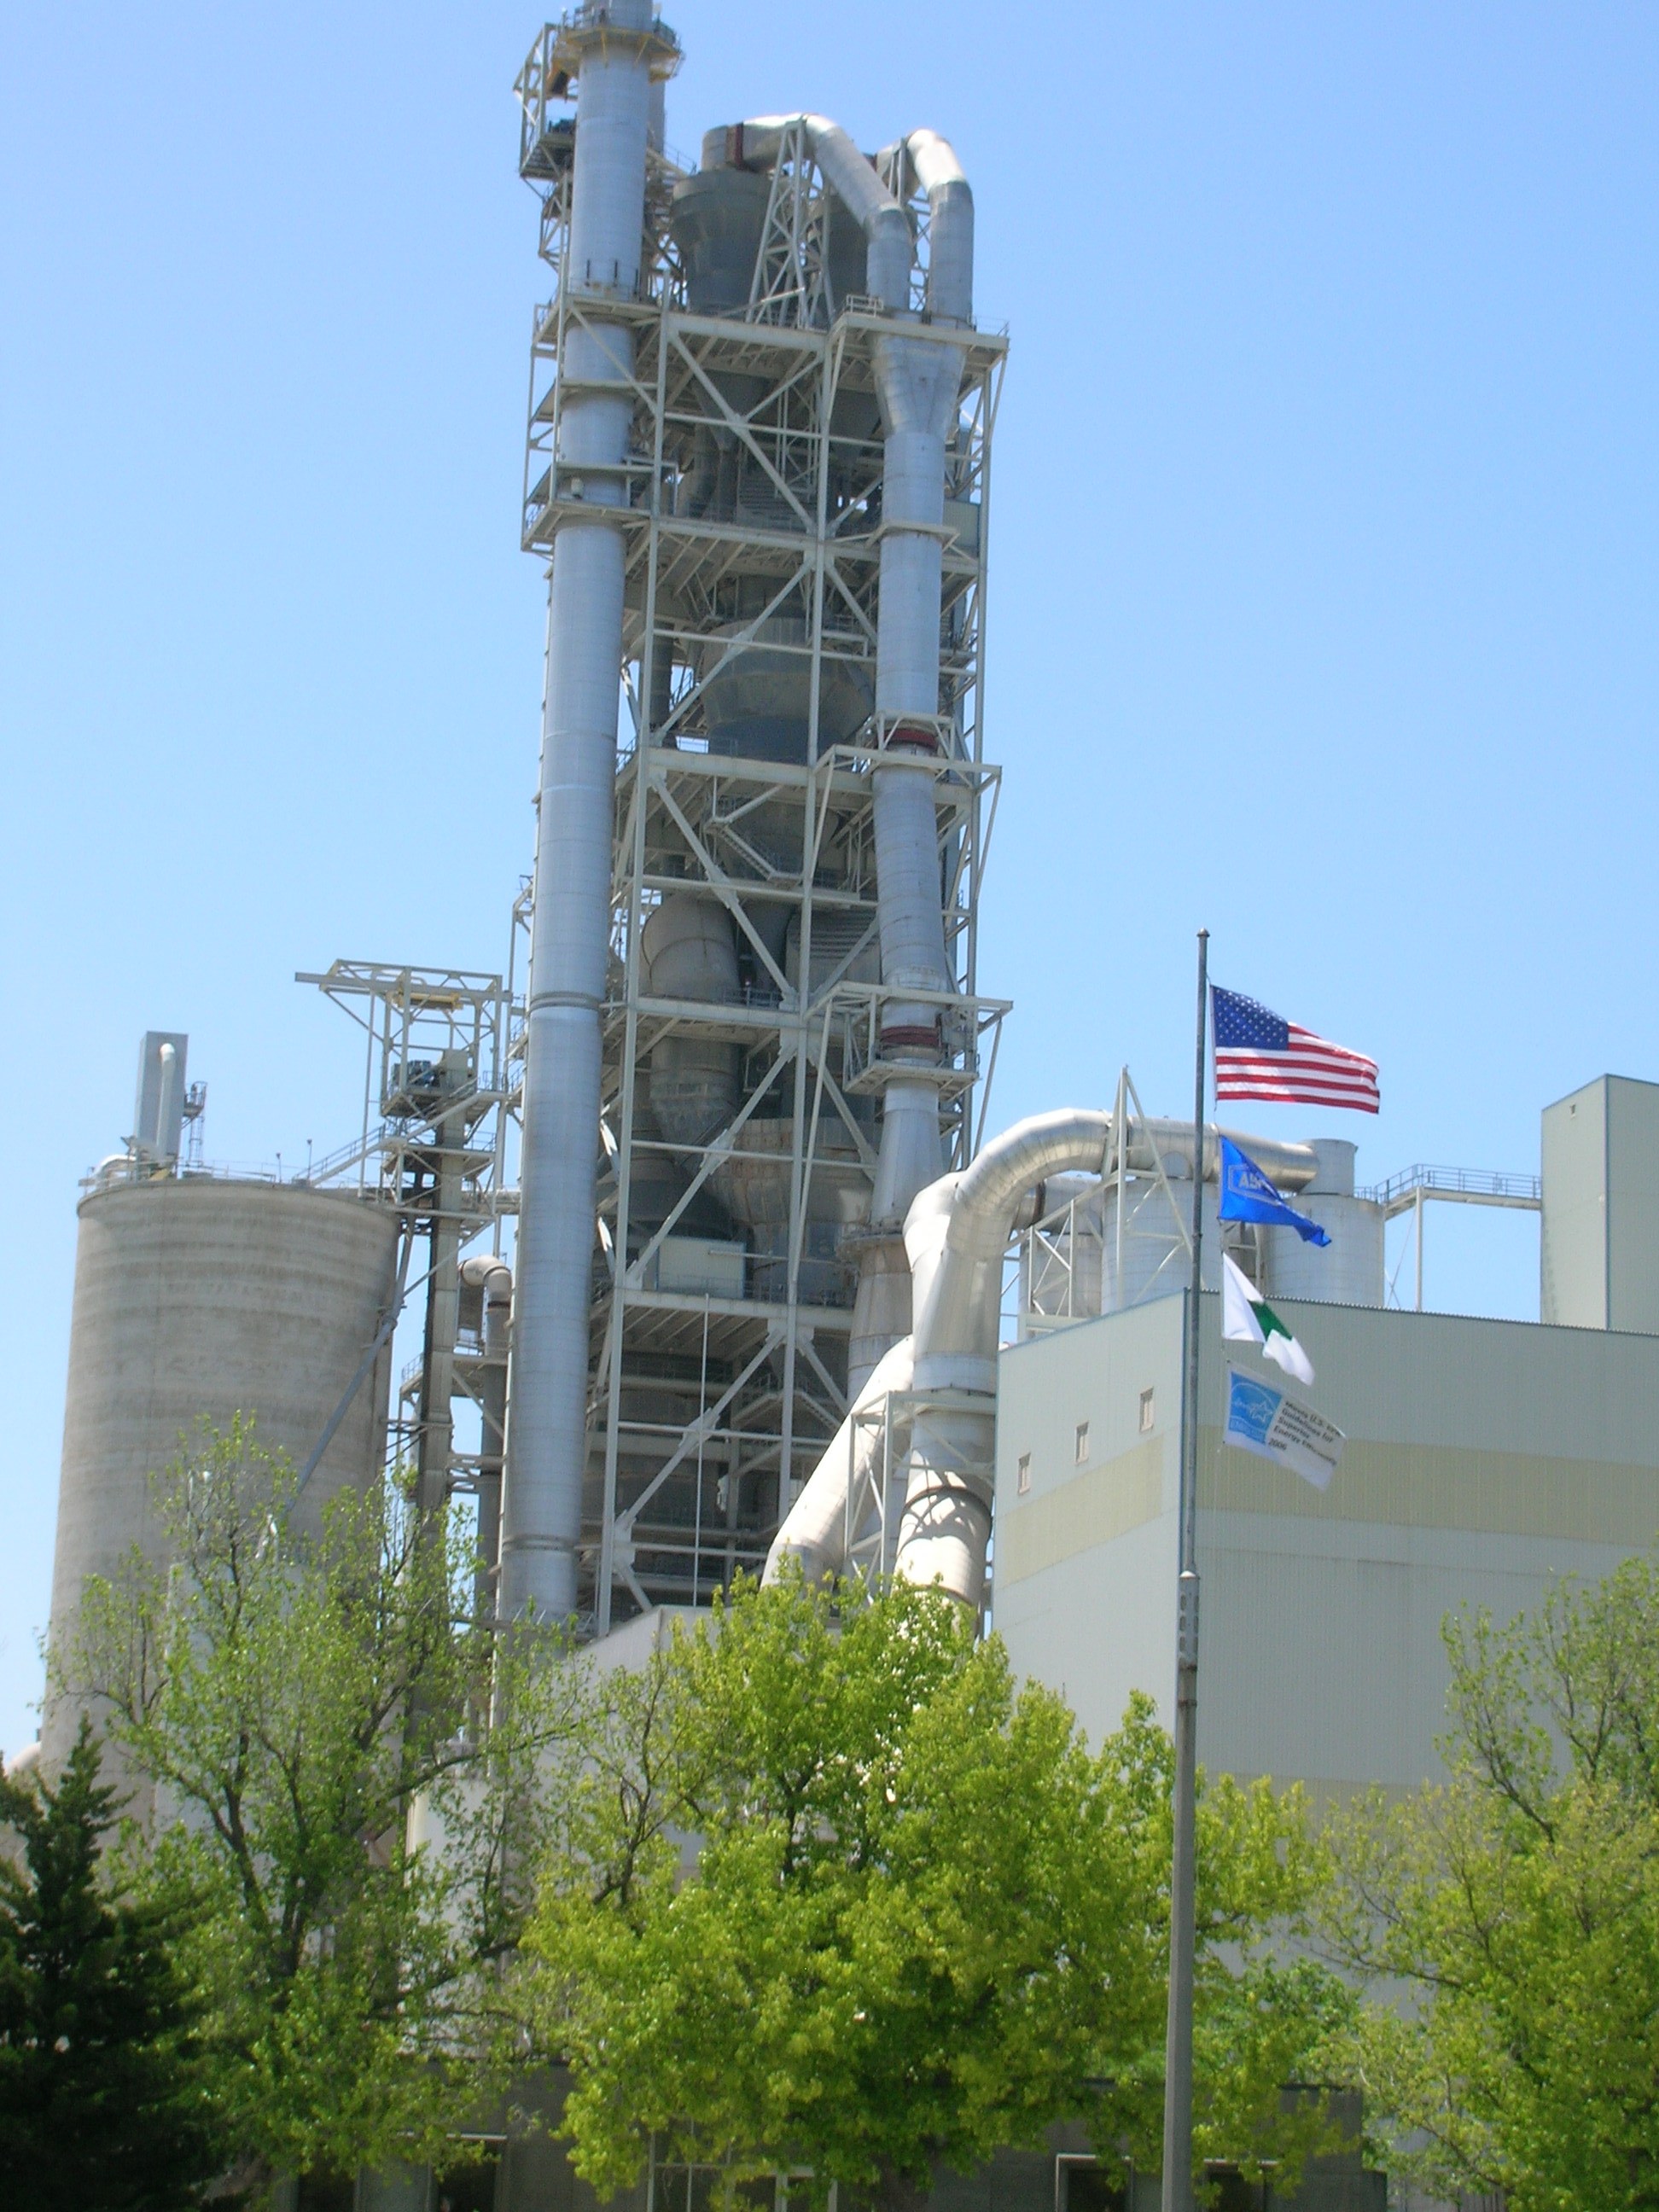 Ash Grove Chanute Cement Plant with Flag